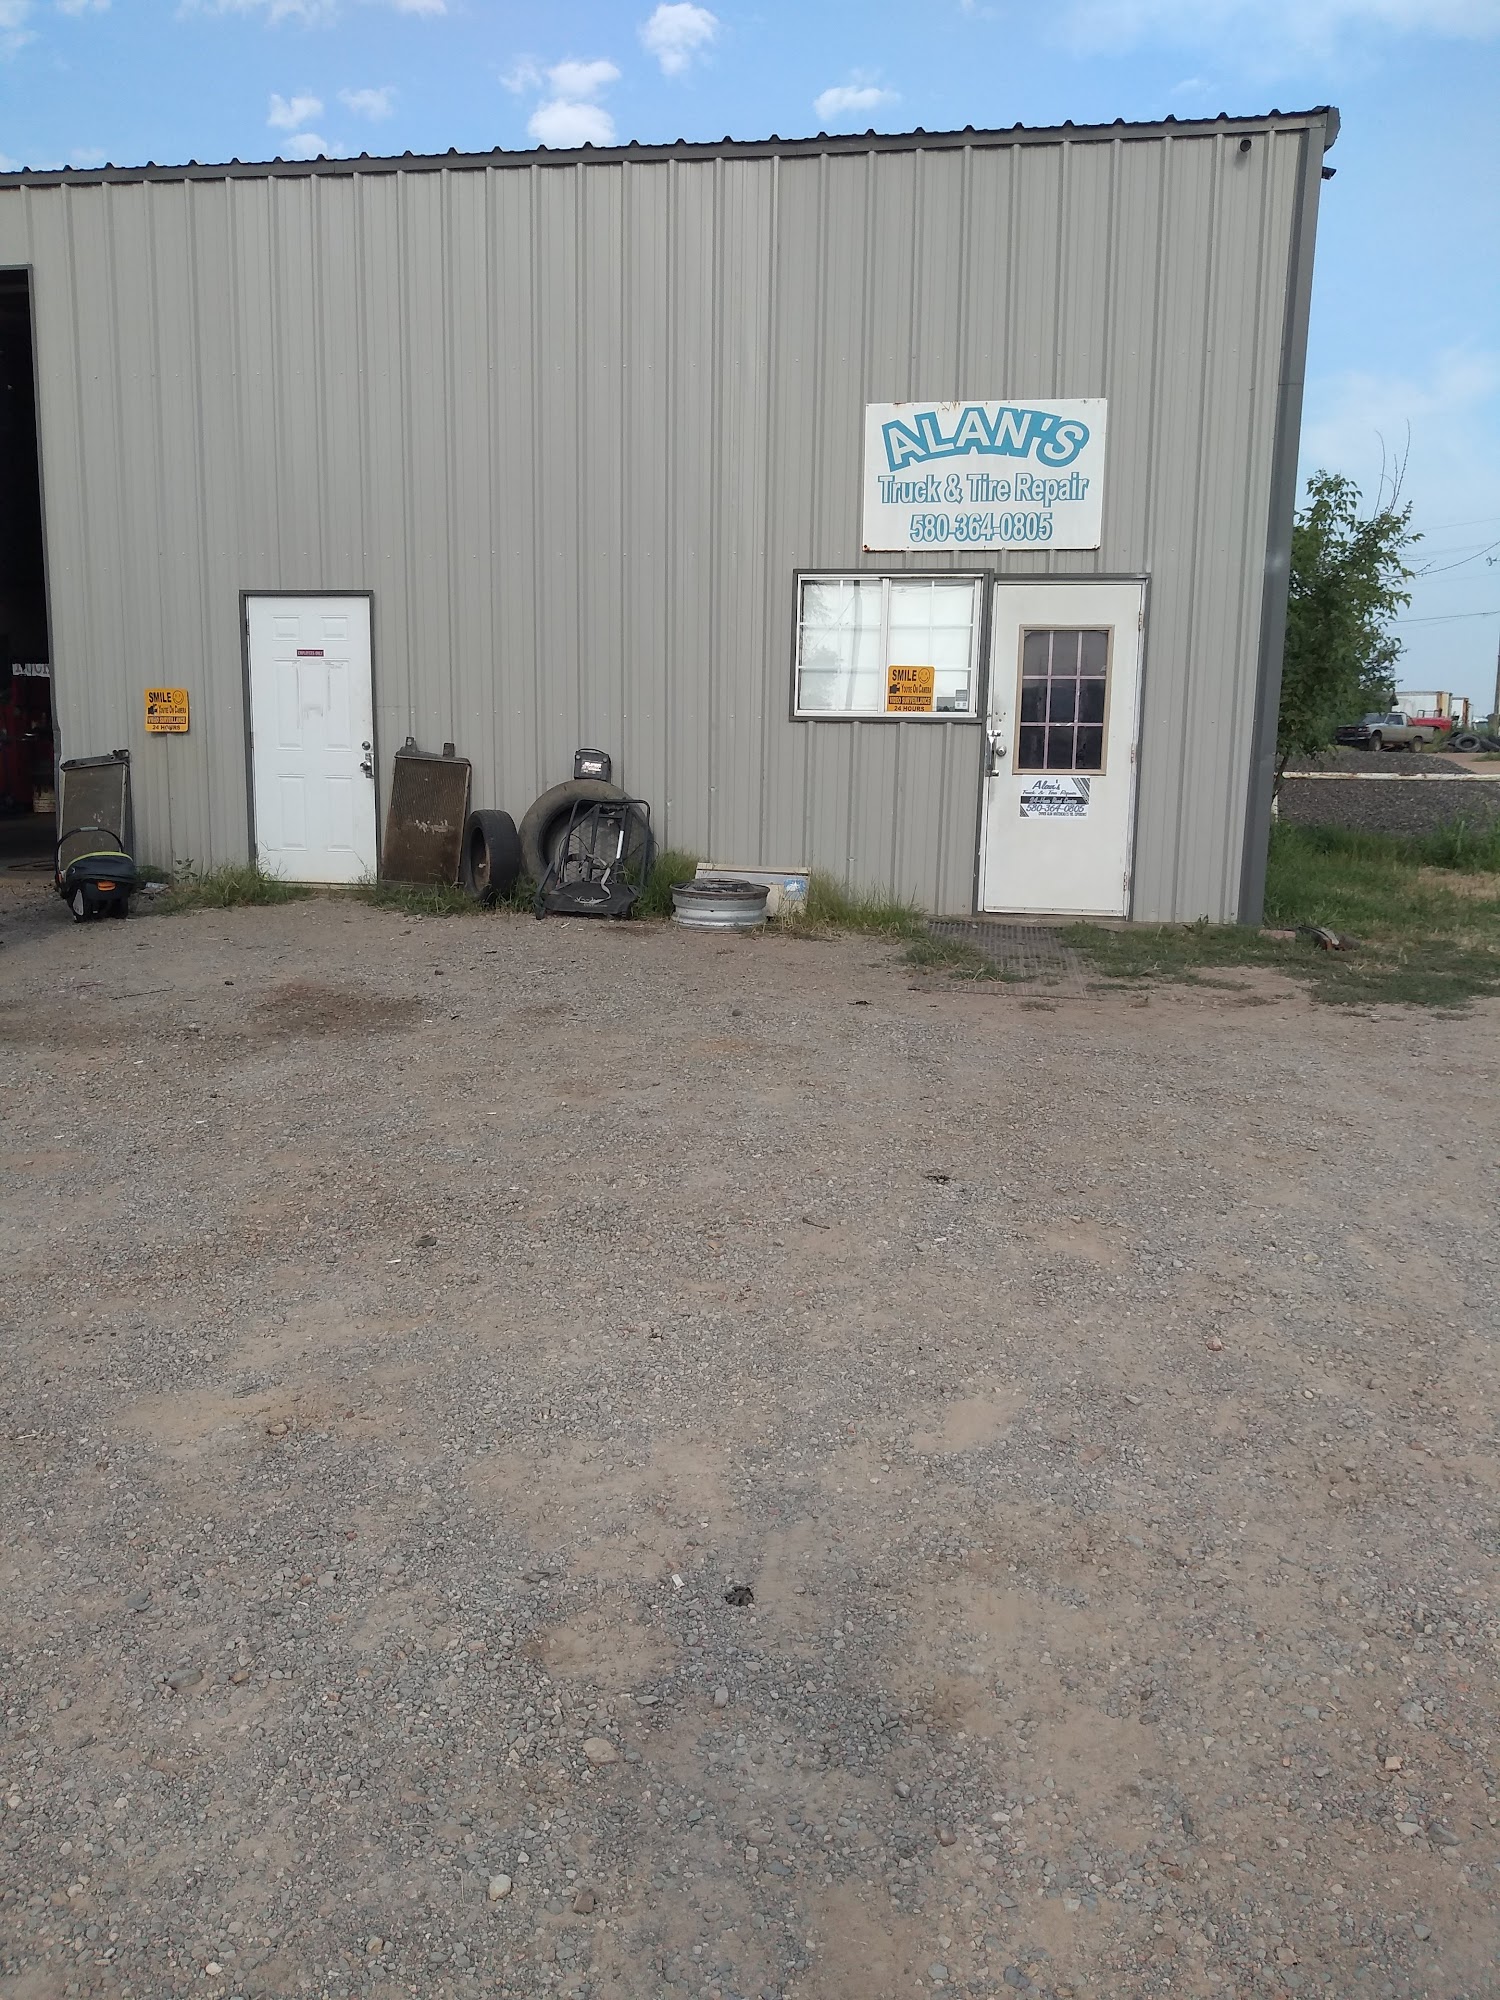 Alan's Truck and Tire Repair 3621 S Mississippi Ave, Atoka Oklahoma 74525